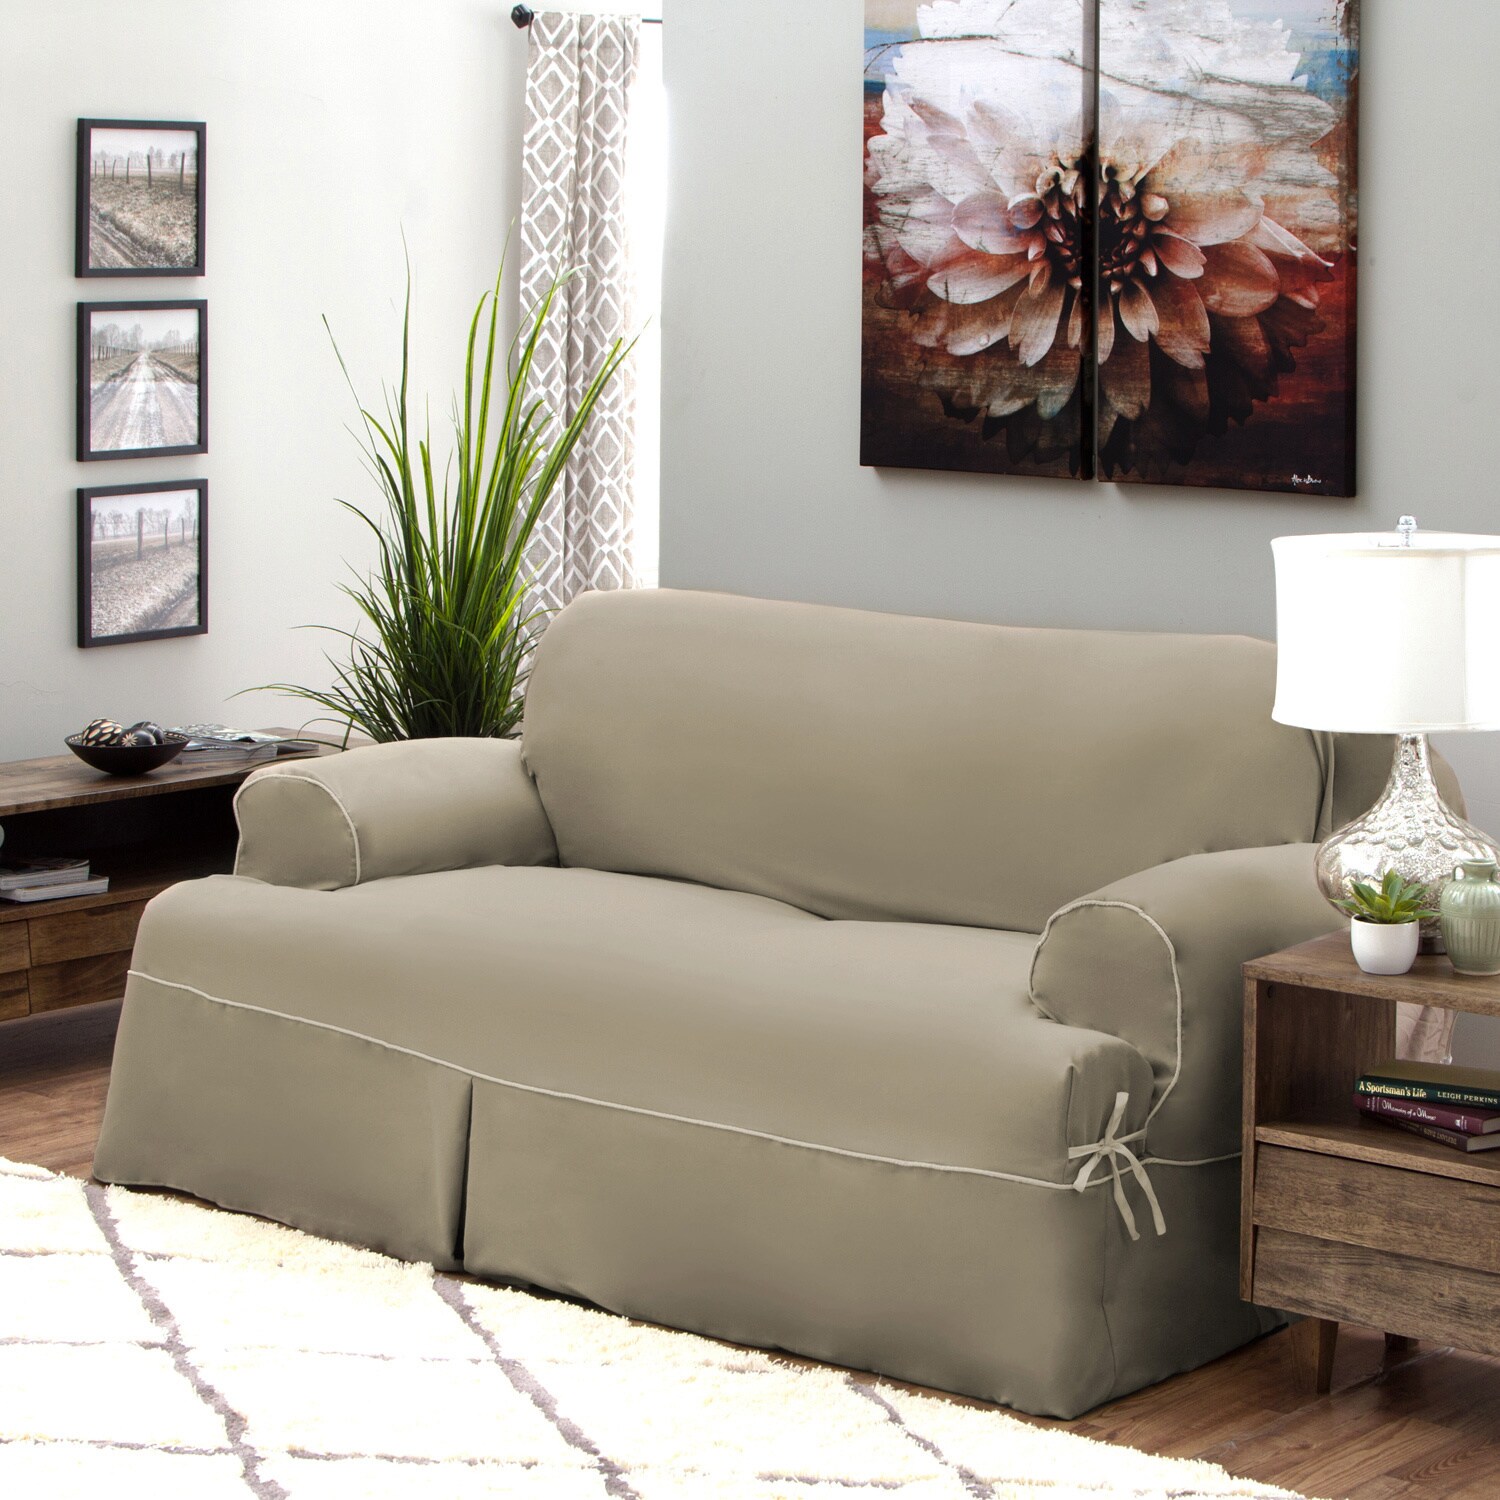 https://ak1.ostkcdn.com/images/products/9555271/Tailor-Fit-Twill-Relaxed-Fit-T-Cushion-Sofa-Slipcover-86e591c1-a8b9-47ef-8459-e9bc5dc1efec.jpg